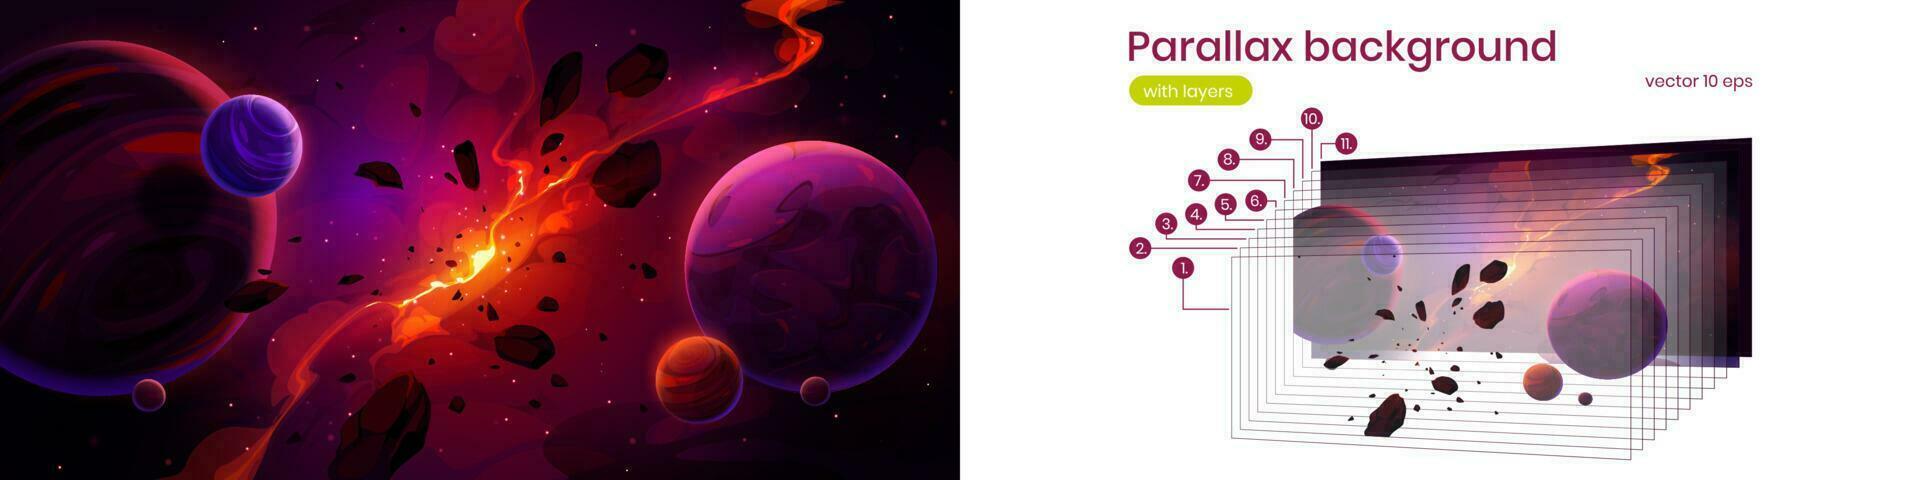 Parallax background planets in outer space, stars vector